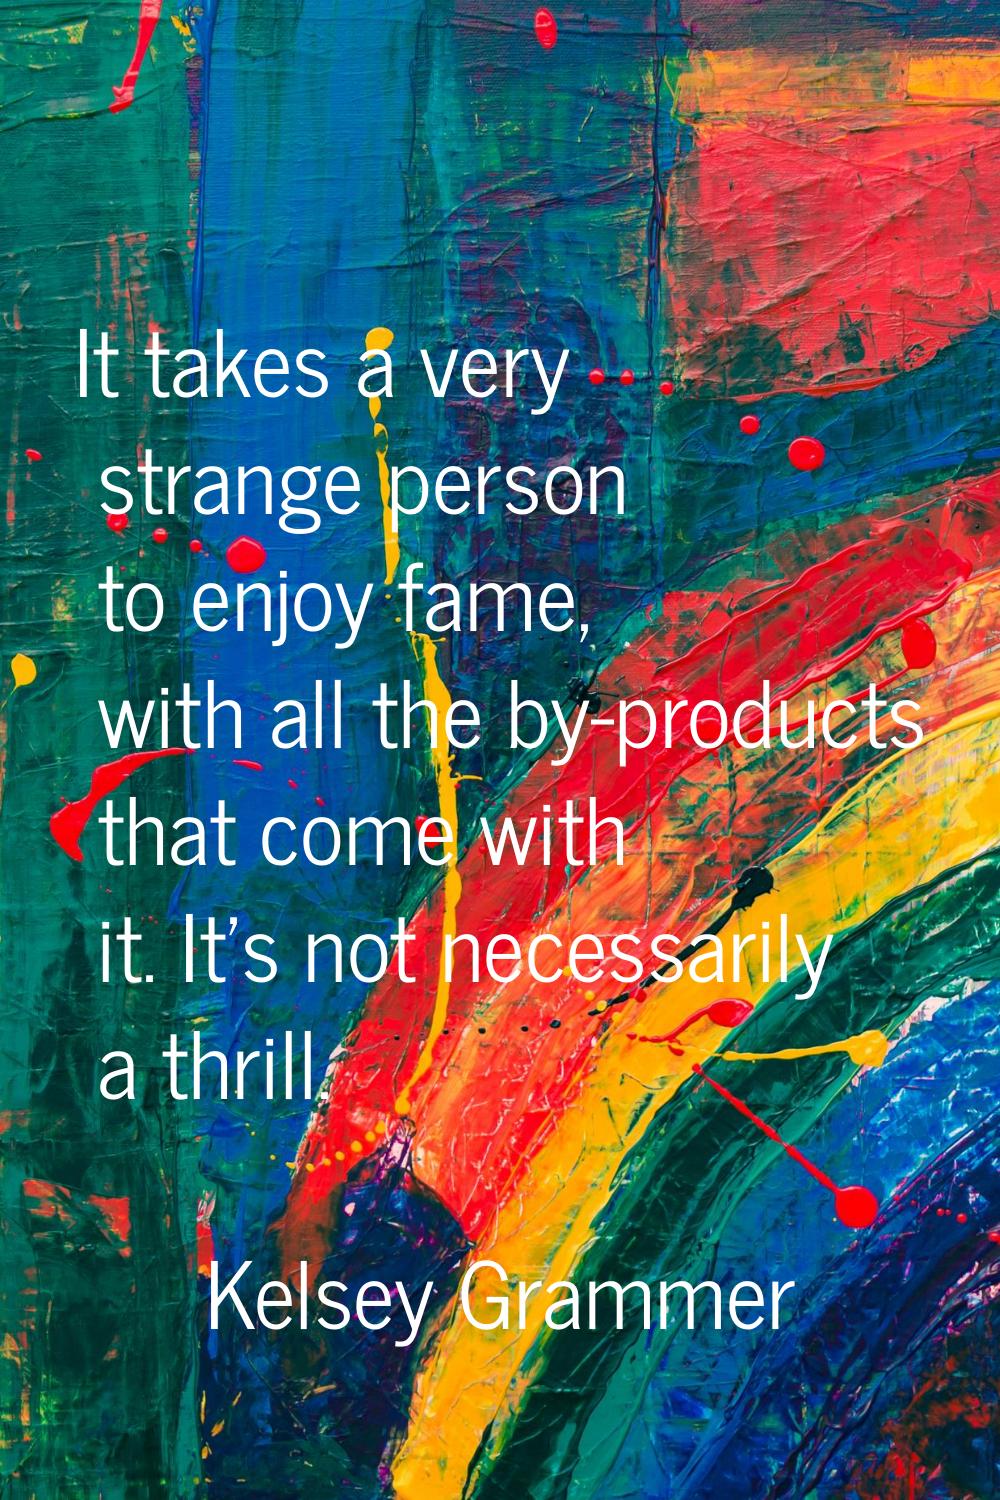 It takes a very strange person to enjoy fame, with all the by-products that come with it. It's not 